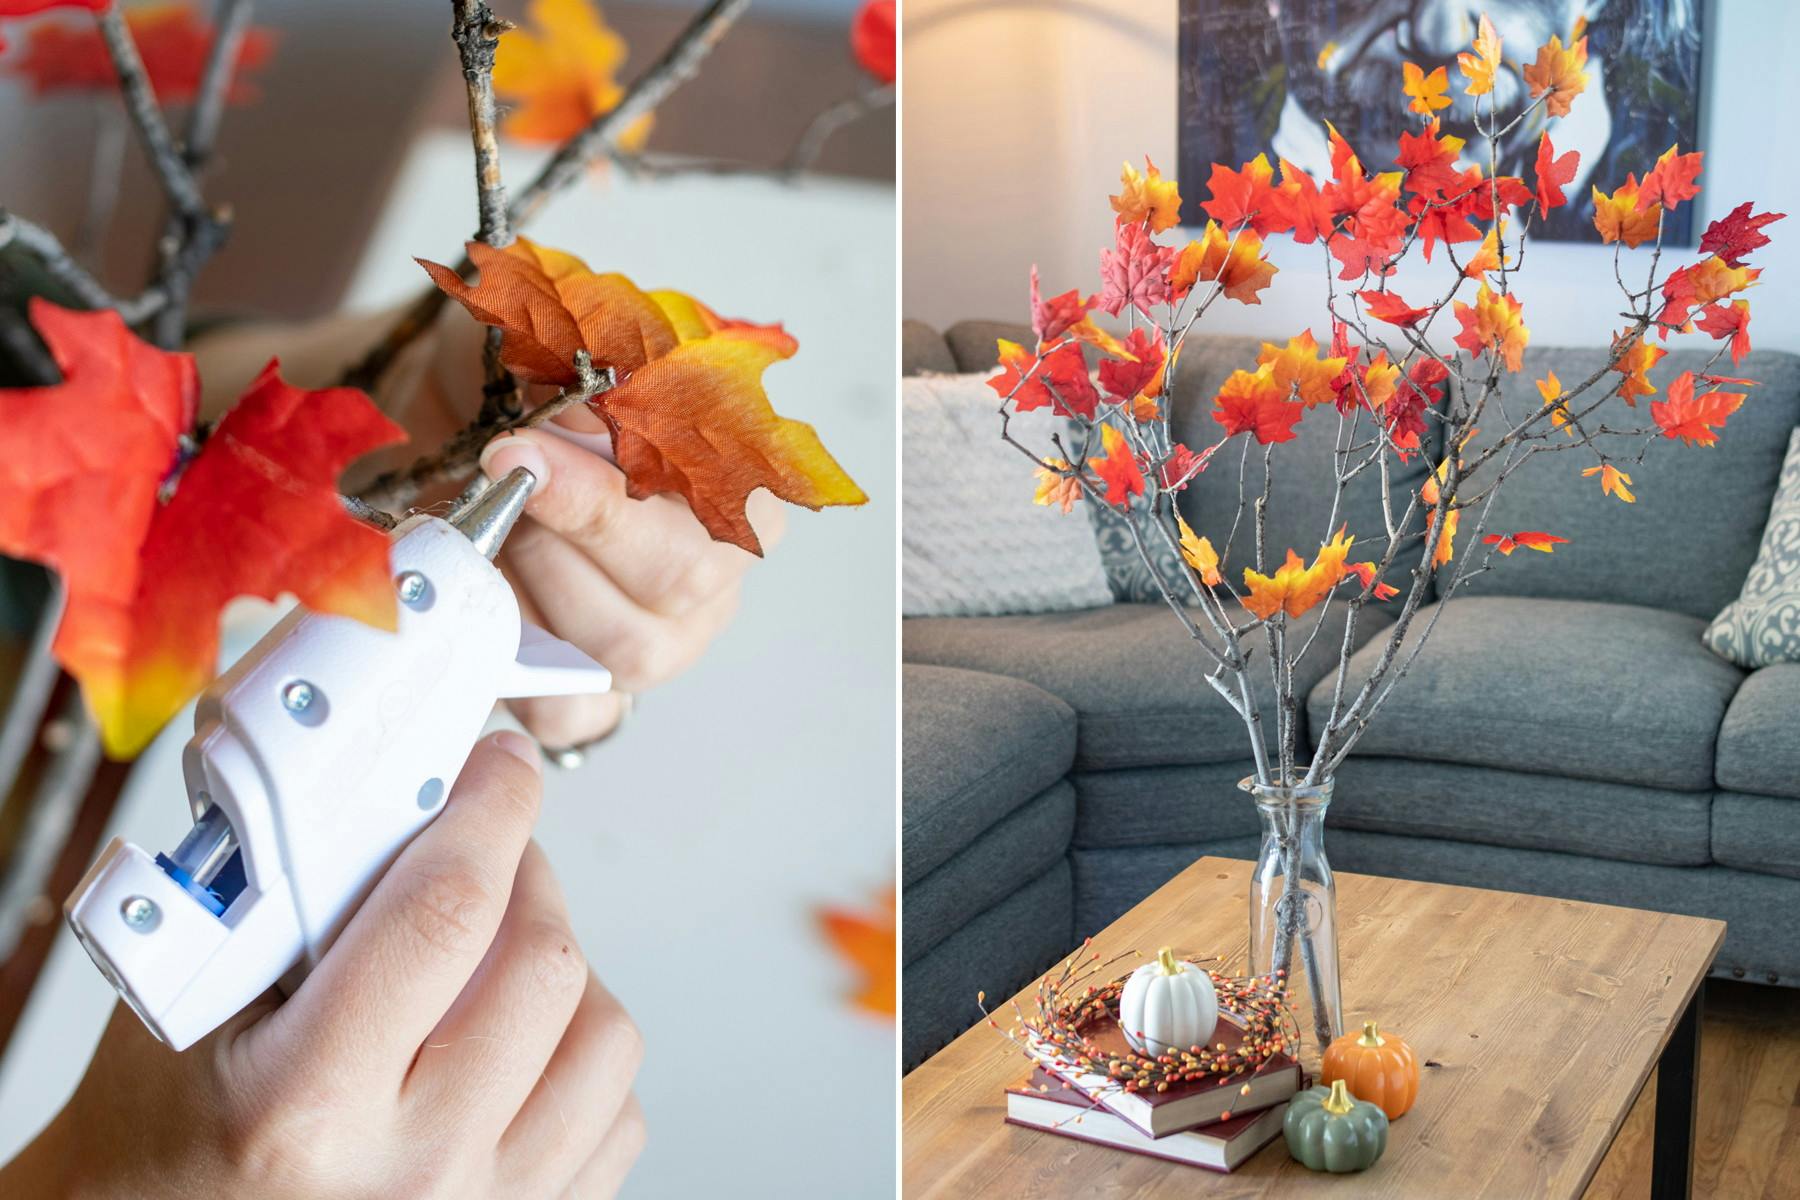 A person using a hot glue gun to glue fake fall leaves to a tree branch.